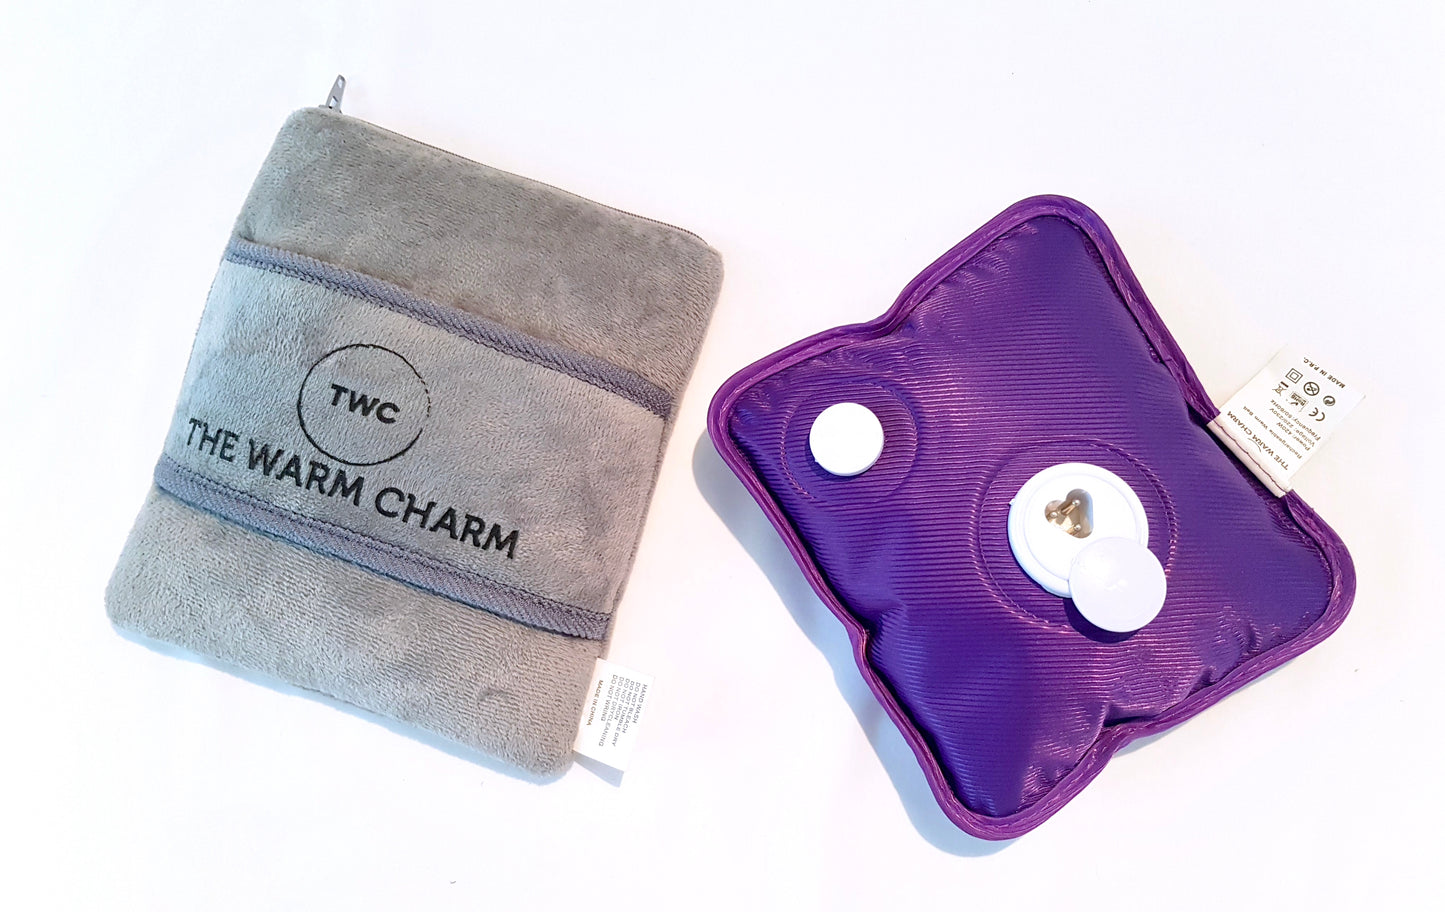 The Warm Charm's mini heat pack with cover